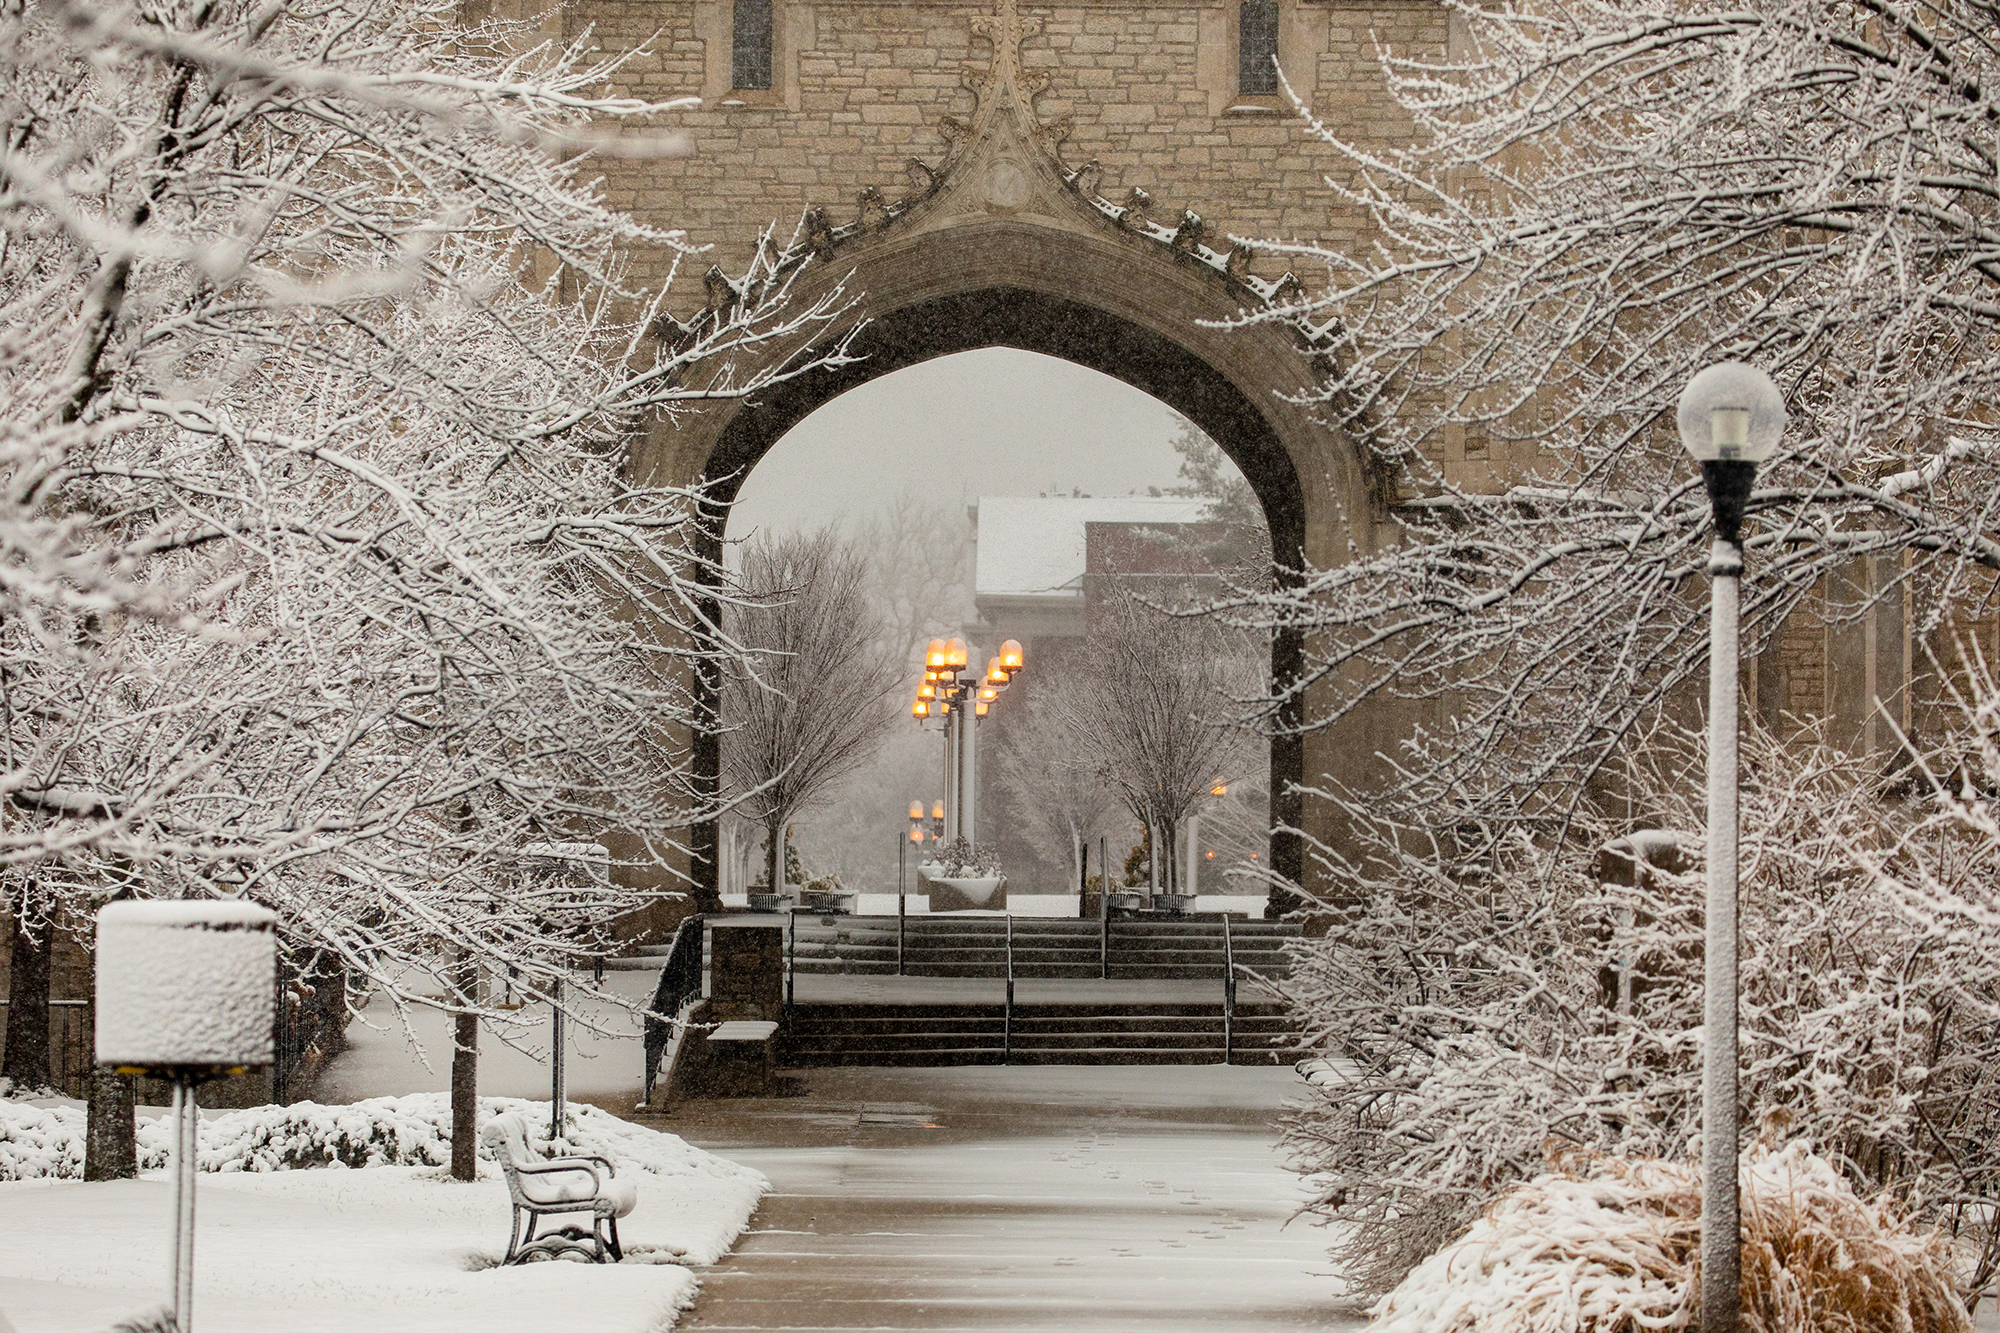 snow covers memorial union as we look through the archway